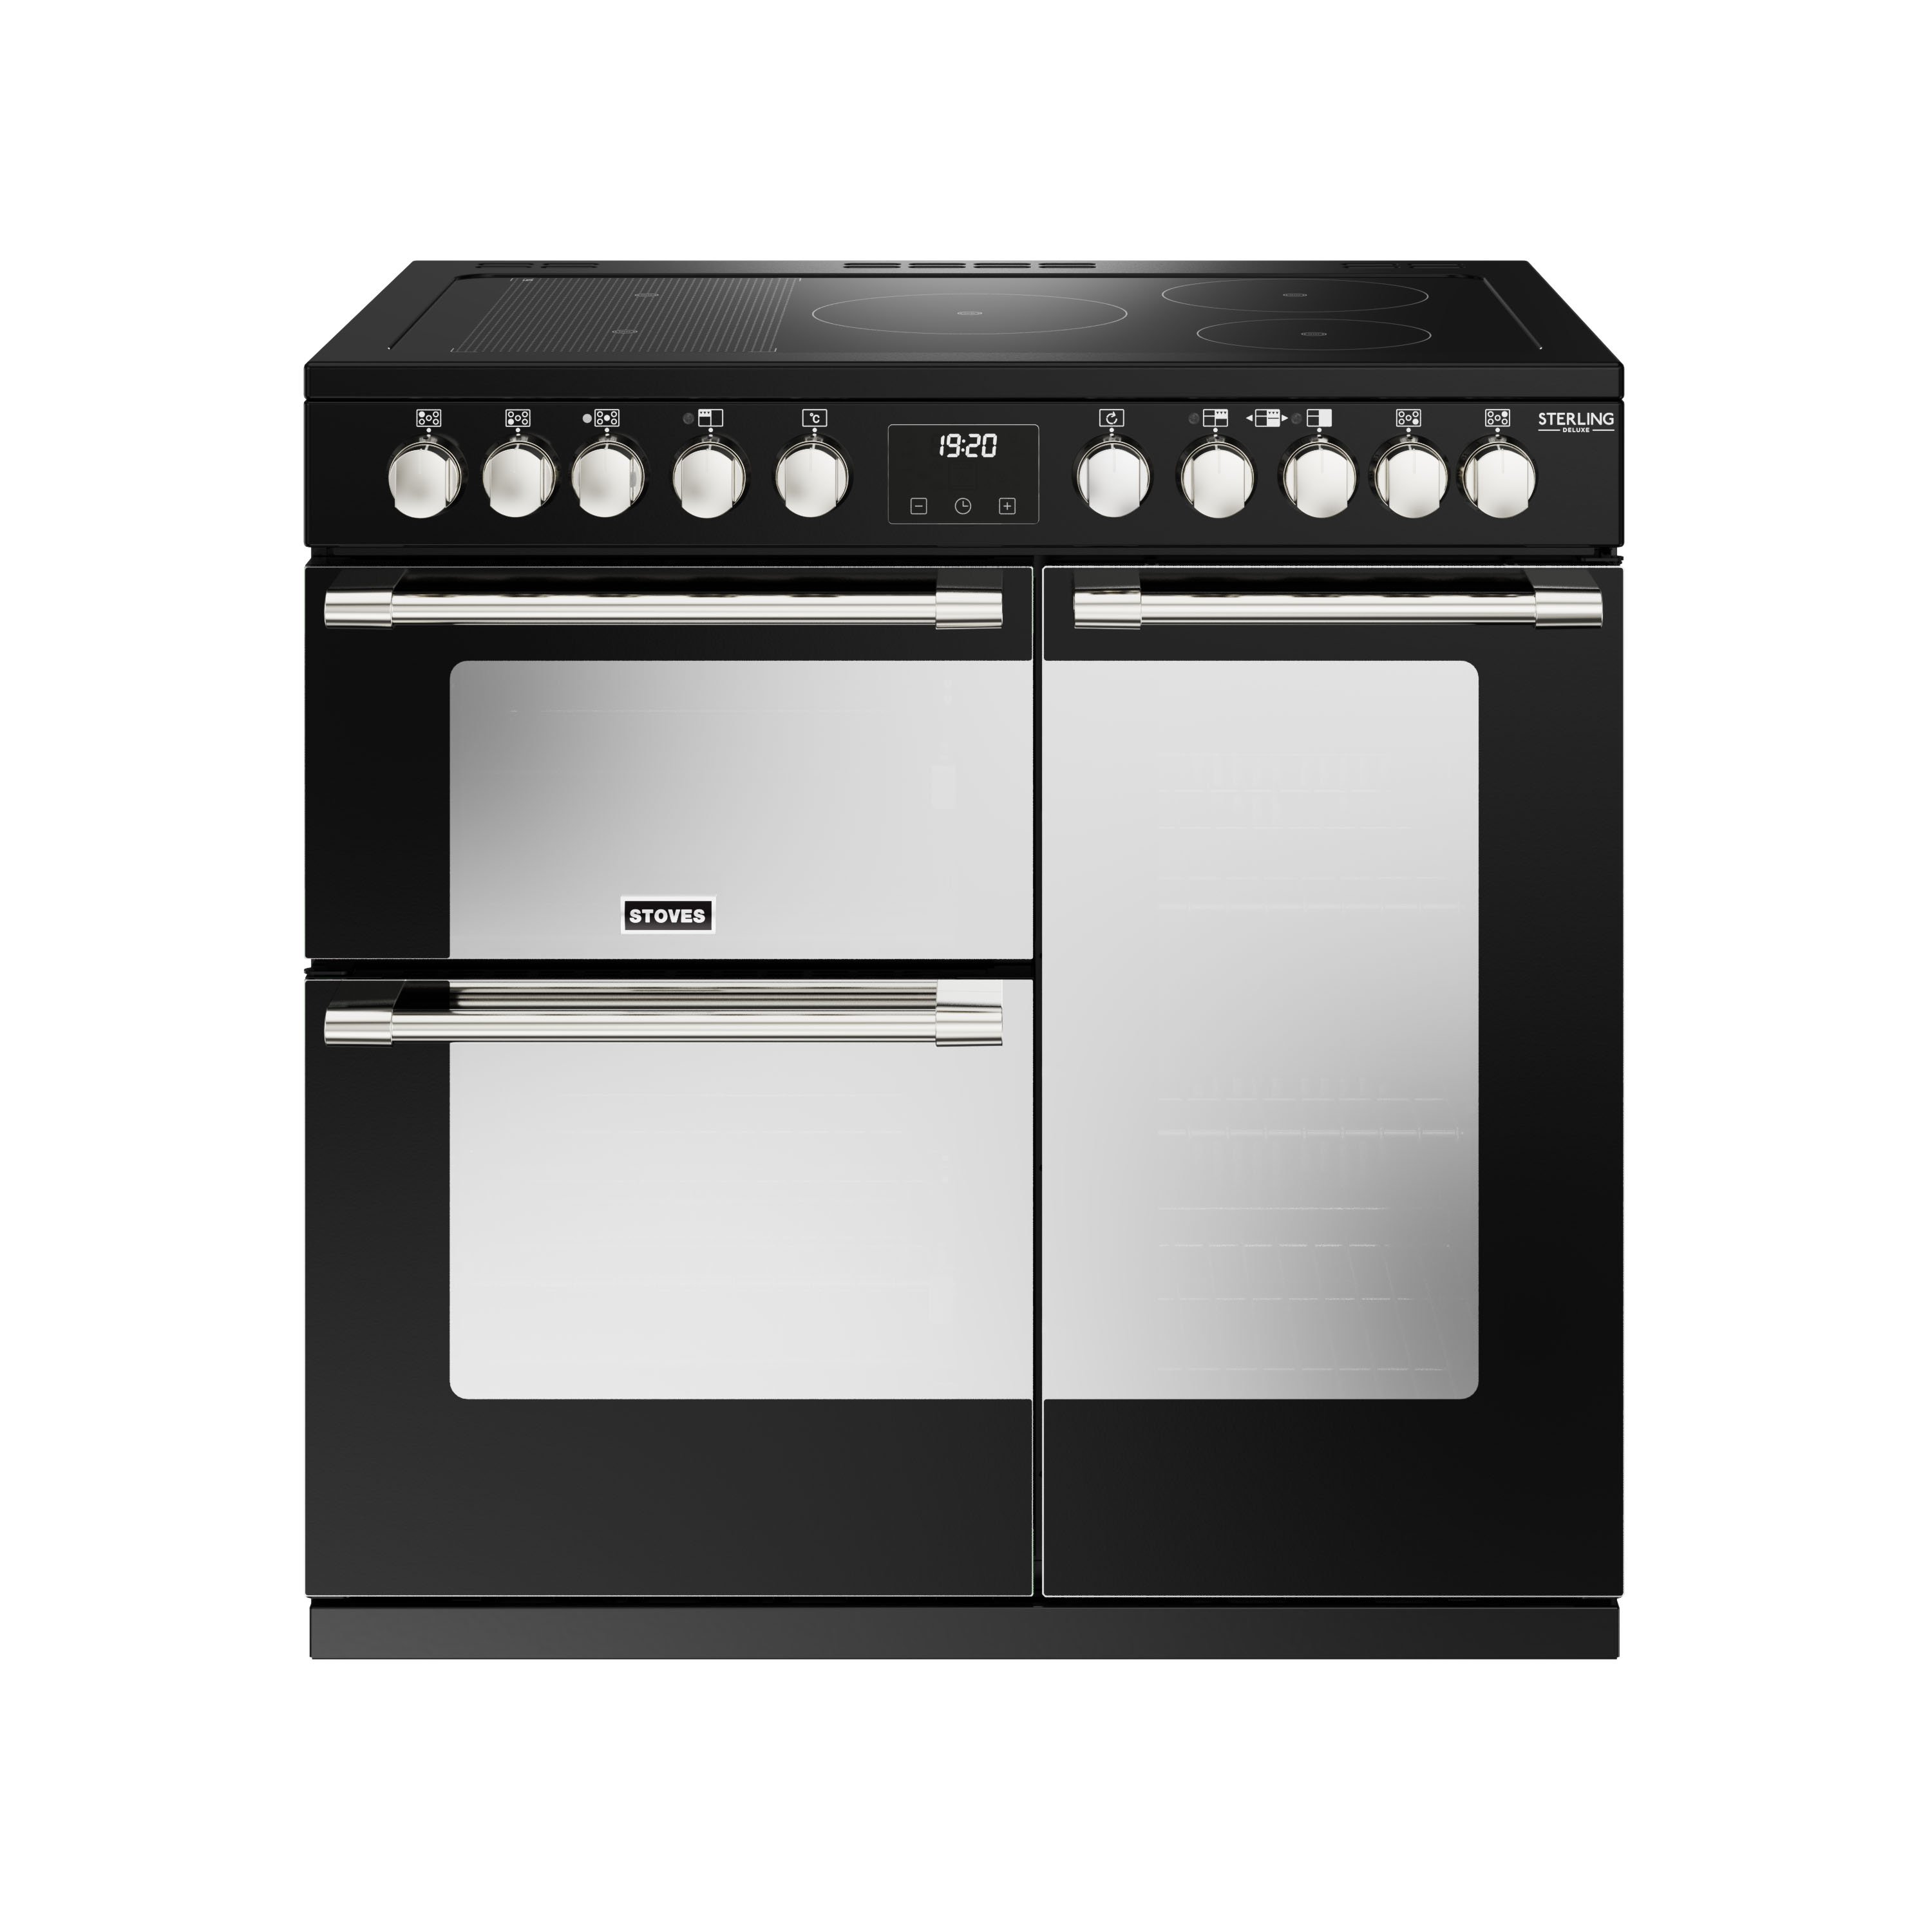 90cm electric induction range cooker with a 5 zone rotary contol hob, conventional oven & grill, multifunction main oven with TrueTemp digital thermostat, and tall fanned oven with PROFLEX™